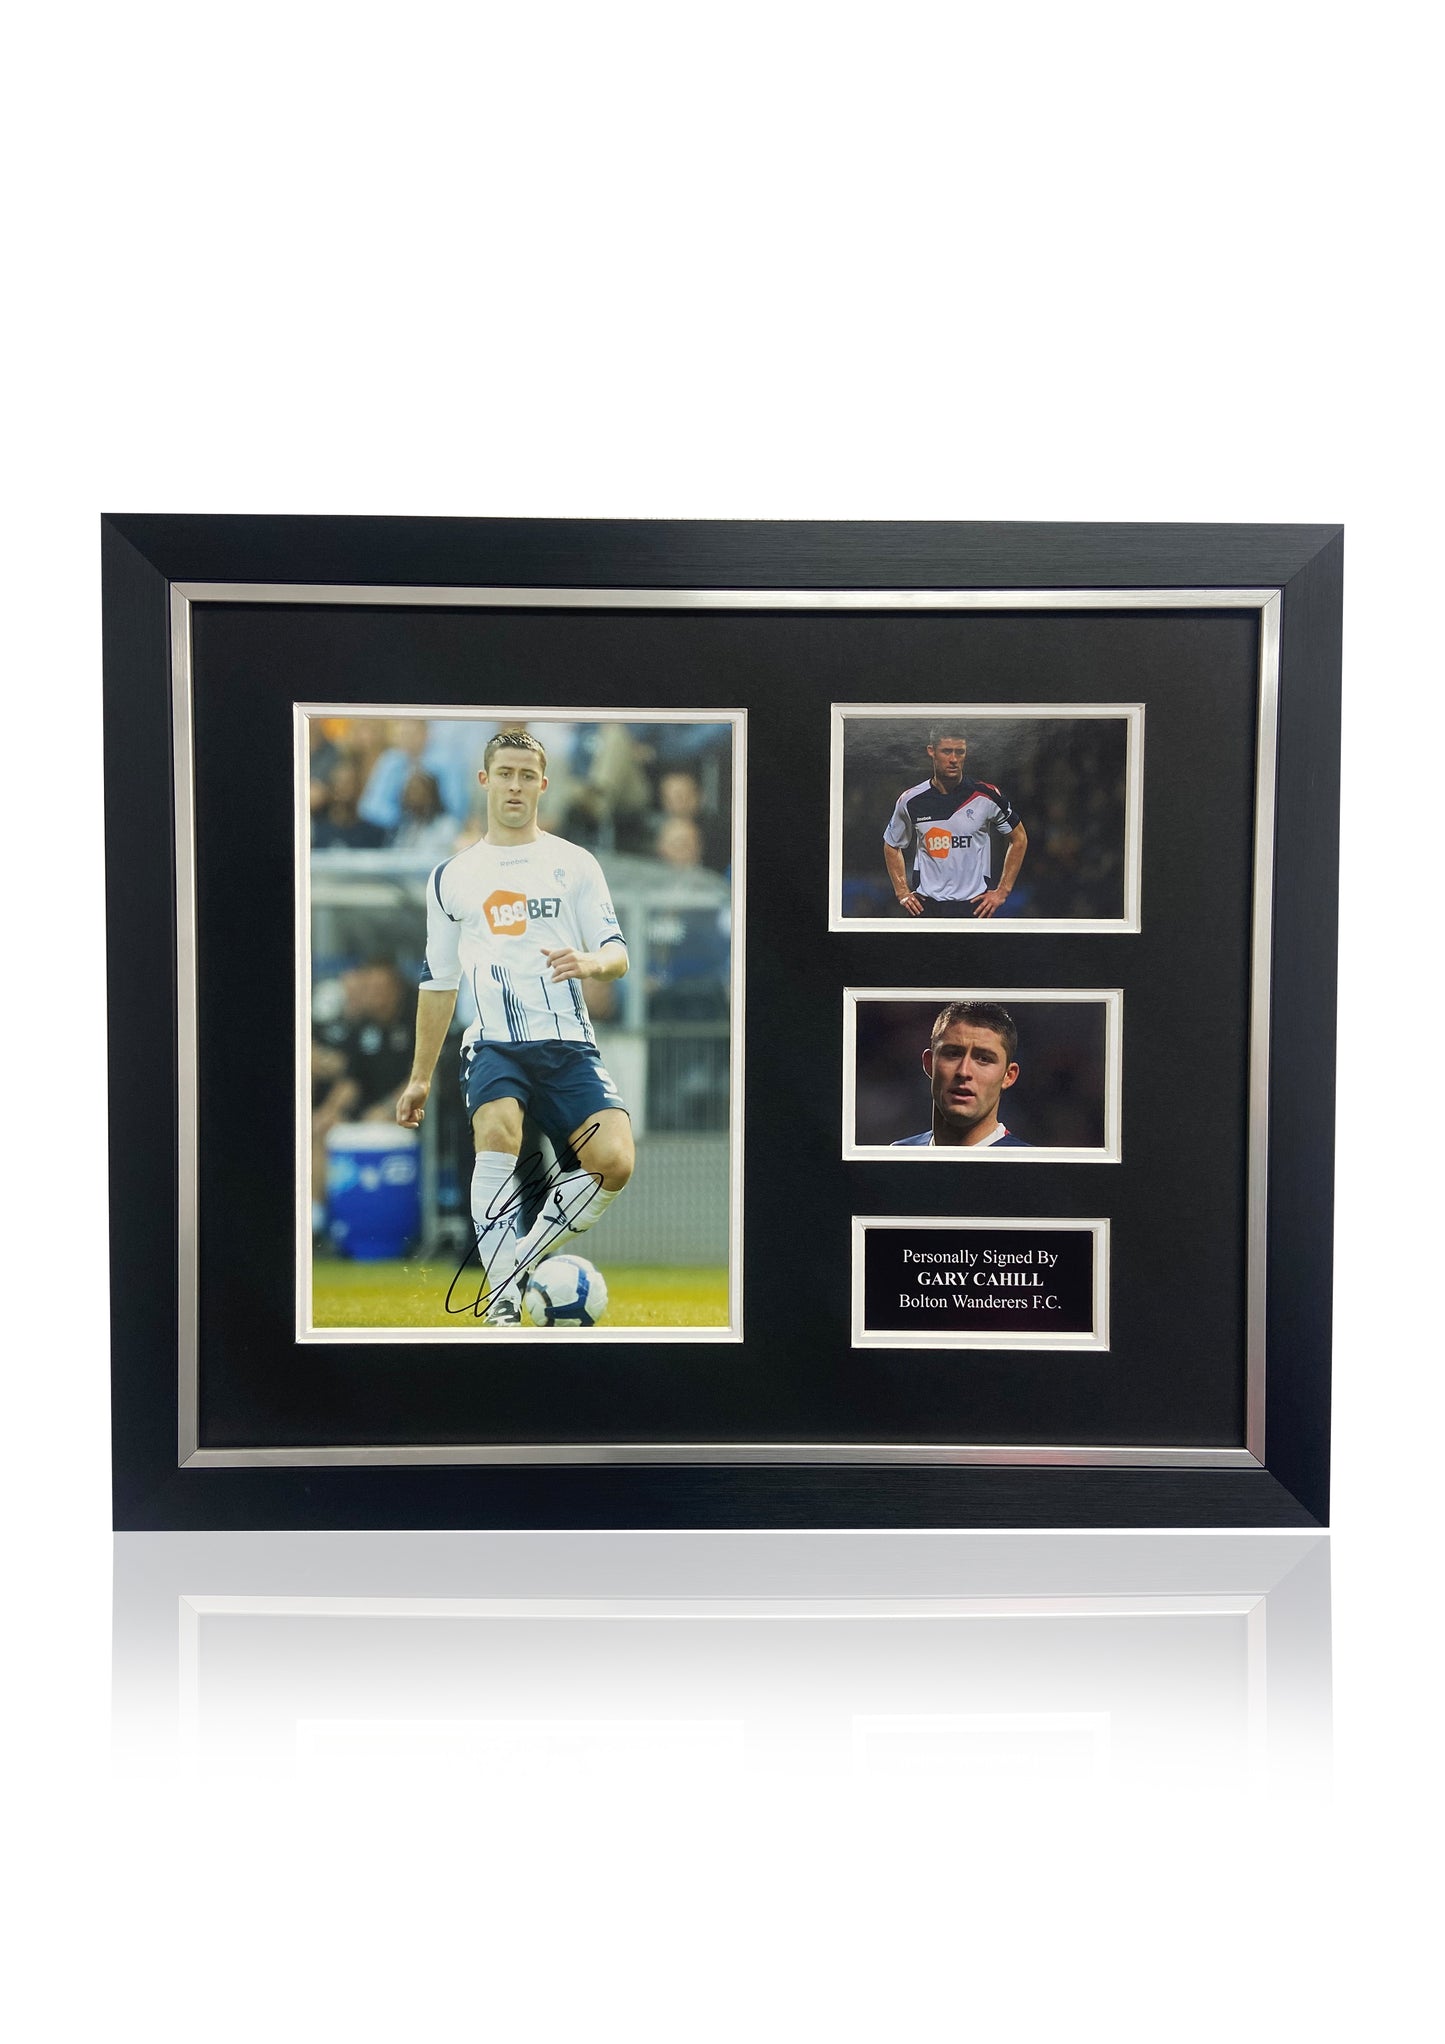 Gary Cahill Bolton Wandferers F.C. signed framed photo card montage